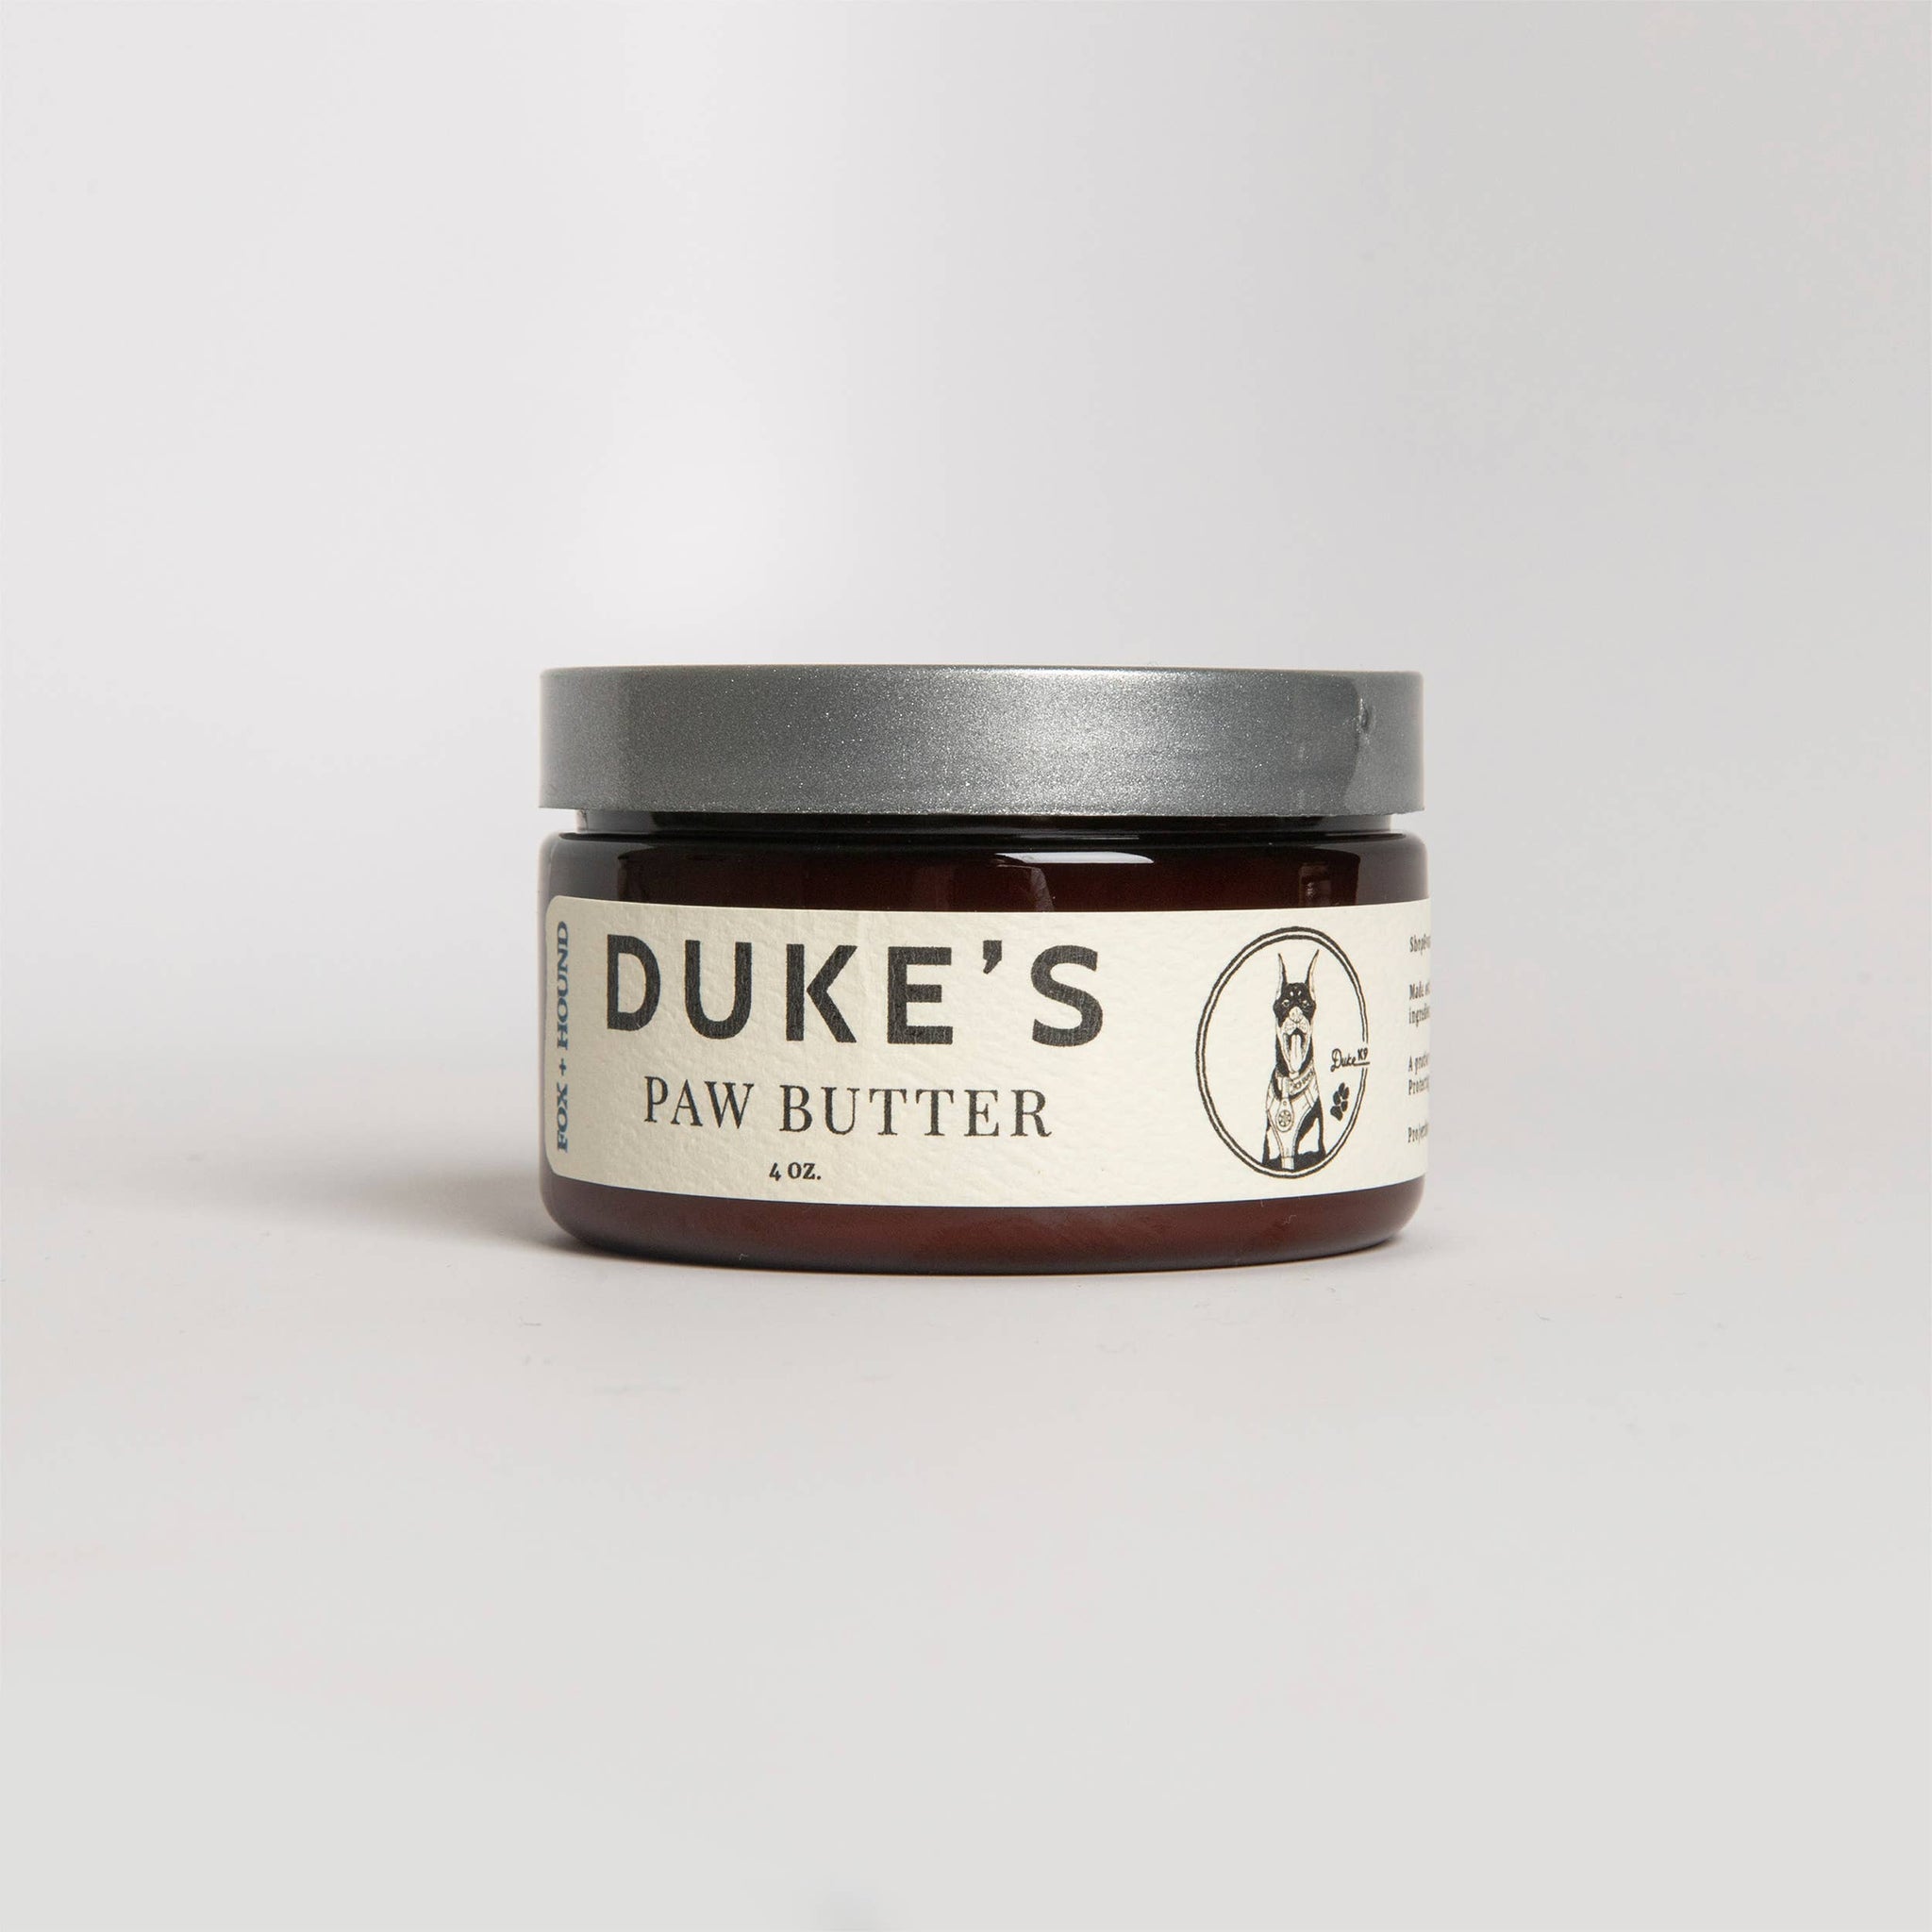 Dukes Paw Butter - Balm - Holler Brighton - Fox and Hounds